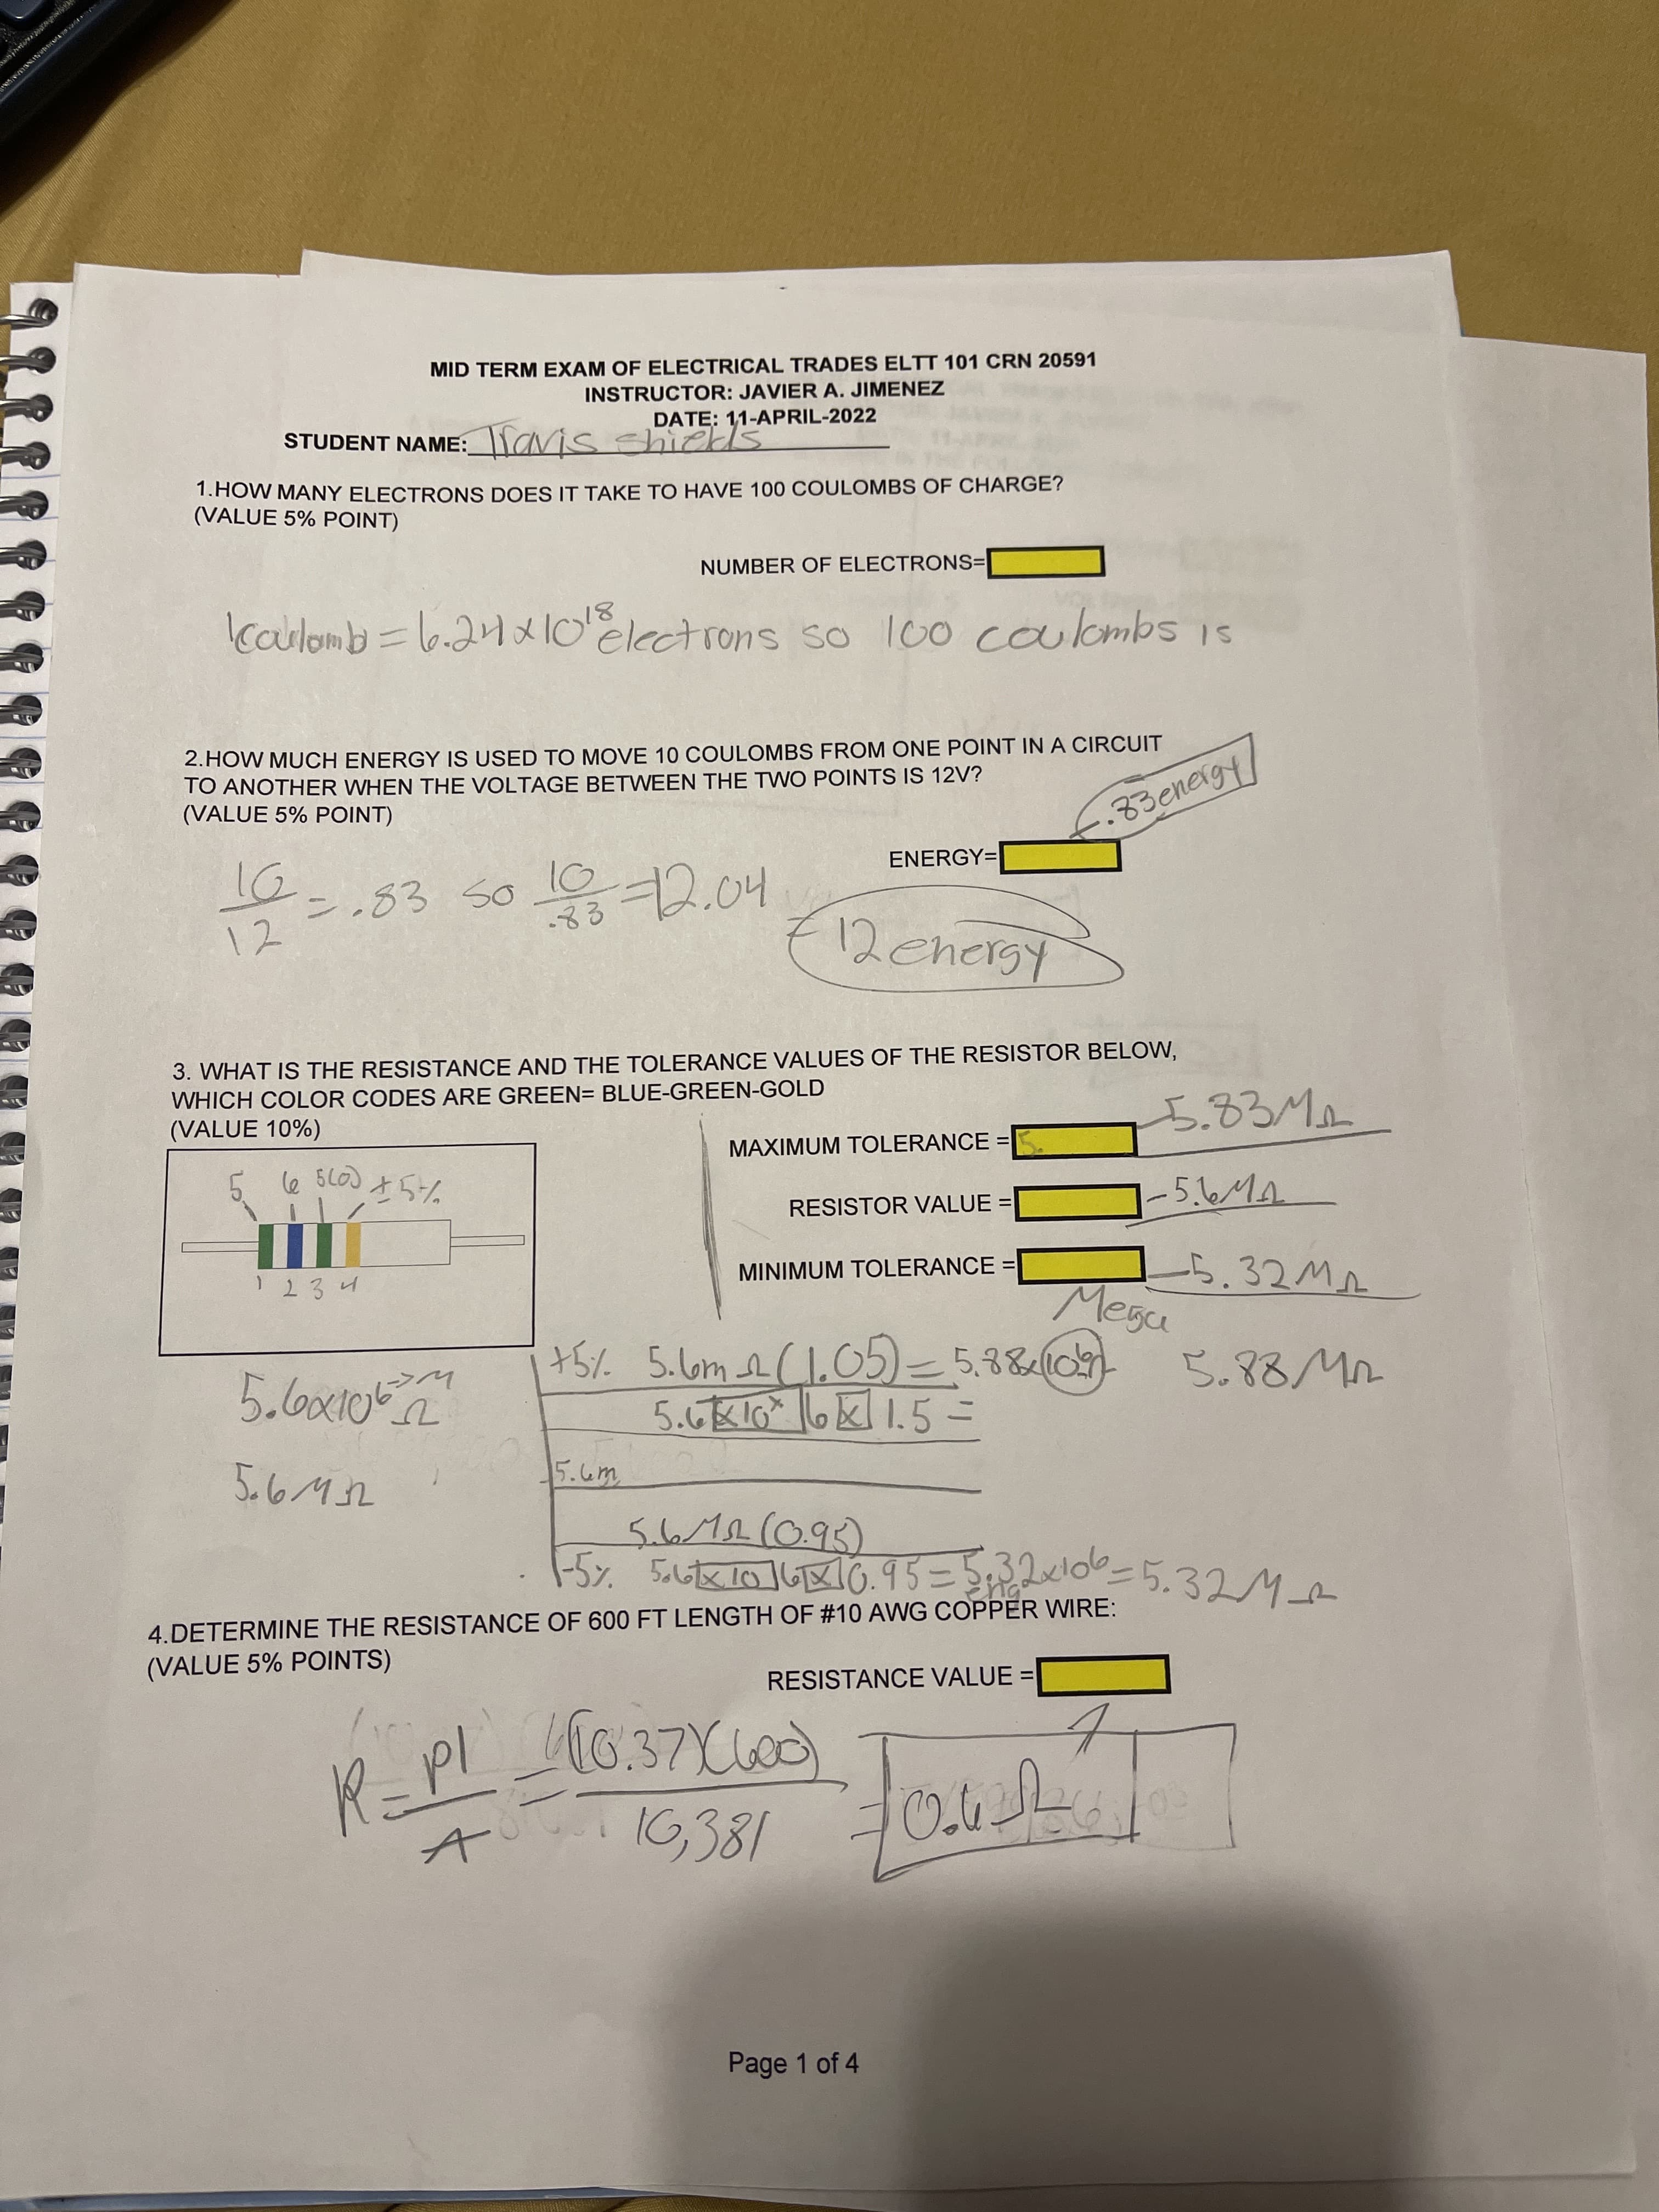 MID TERM EXAM OF ELECTRICAL TRADES ELTT 101 CRN 20591
INSTRUCTOR: JAVIER A. JIMENEZ
DATE: 11-APRIL-2022
STUDENT NAME:lavis shiek
1.HOW MANY ELECTRONS DOES IT TAKE TO HAVE 100 COULOMBS OF CHARGE?
(VALUE 5% POINT)
NUMBER OF ELECTRONS=
Caulomb =l6.21x10 electrons so lo0 coulombs is
2.HOW MUCH ENERGY IS USED TO MOVE 10 COULOMBS FROM ONE POINT IN A CIRCUIT
TO ANOTHER WHEN THE VOLTAGE BETWEEN THE TWO POINTS IS 12V?
(VALUE 5% POINT)
.83energy
ENERGY=
.83 S0
11
10
72.04
12
3. WHAT IS THE RESISTANCE AND THE TOLERANCE VALUES OF THE RESISTOR BELOW,
WHICH COLOR CODES ARE GREEN= BLUE-GREEN-GOLD
(VALUE 10%)
MAXIMUM TOLERANCE =|
%3D
RESISTOR VALUE =
|-5.6MA
1234
MINIMUM TOLERANCE =
%3D
Megu
+51. 5.l6m eClo05)=5.3&10)
-5%. 5ut10168G. 9 5 = S 5.32M
4.DETERMINE THE RESISTANCE OF 600 FT LENGTH OF #10 AWG COPPER WIRE:
(VALUE 5% POINTS)
RESISTANCE VALUE =
R=PL
16,381
Page 1 of 4
